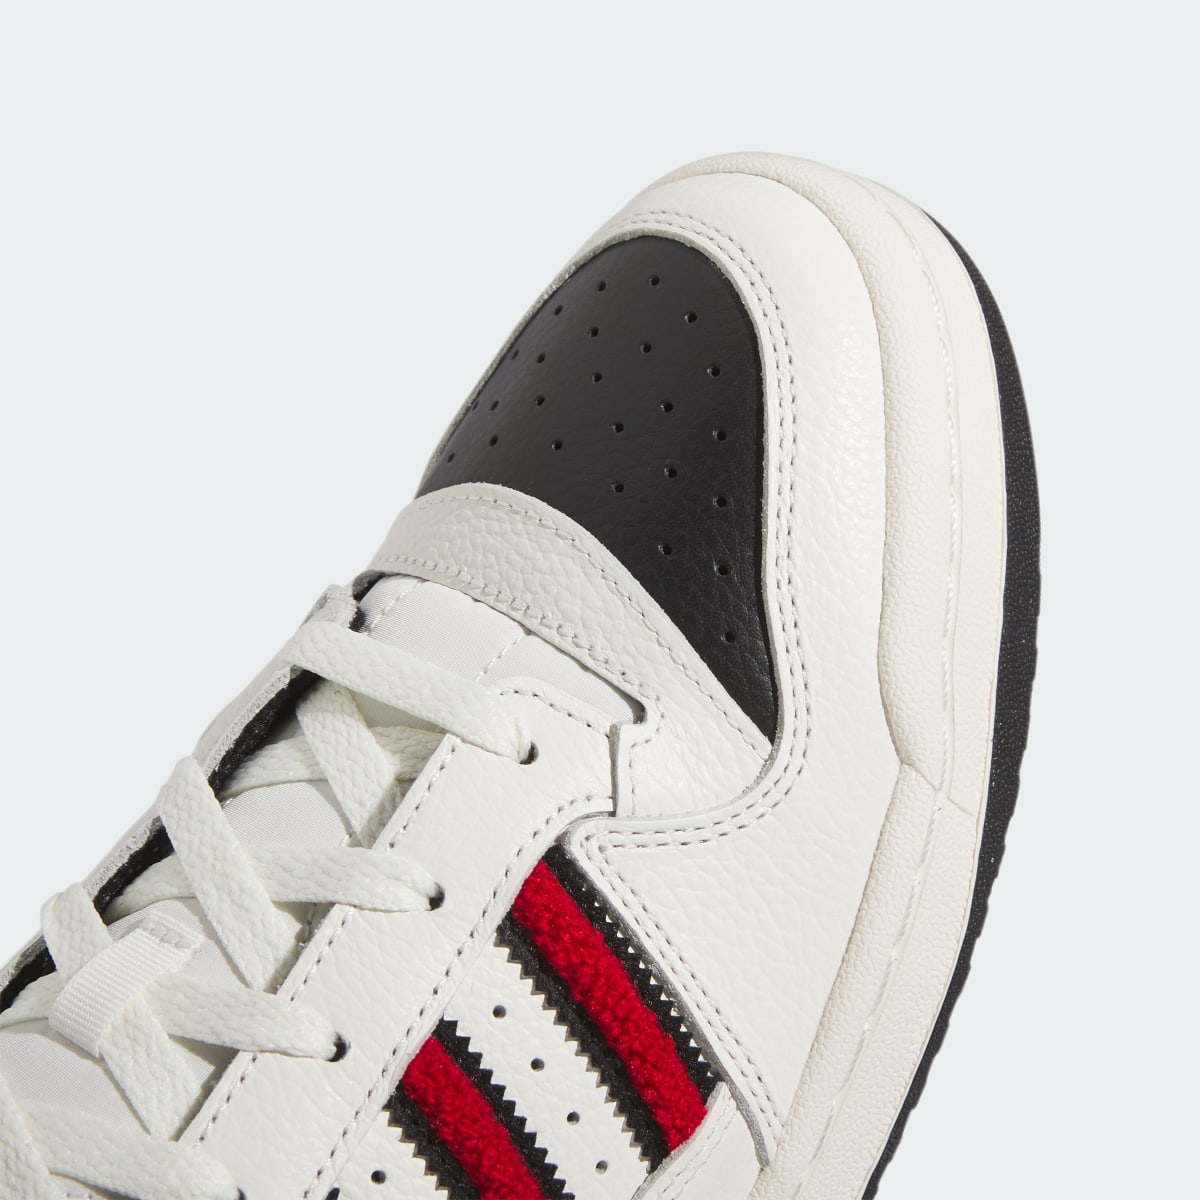 Adidas Louisville Forum Low Shoes. 9